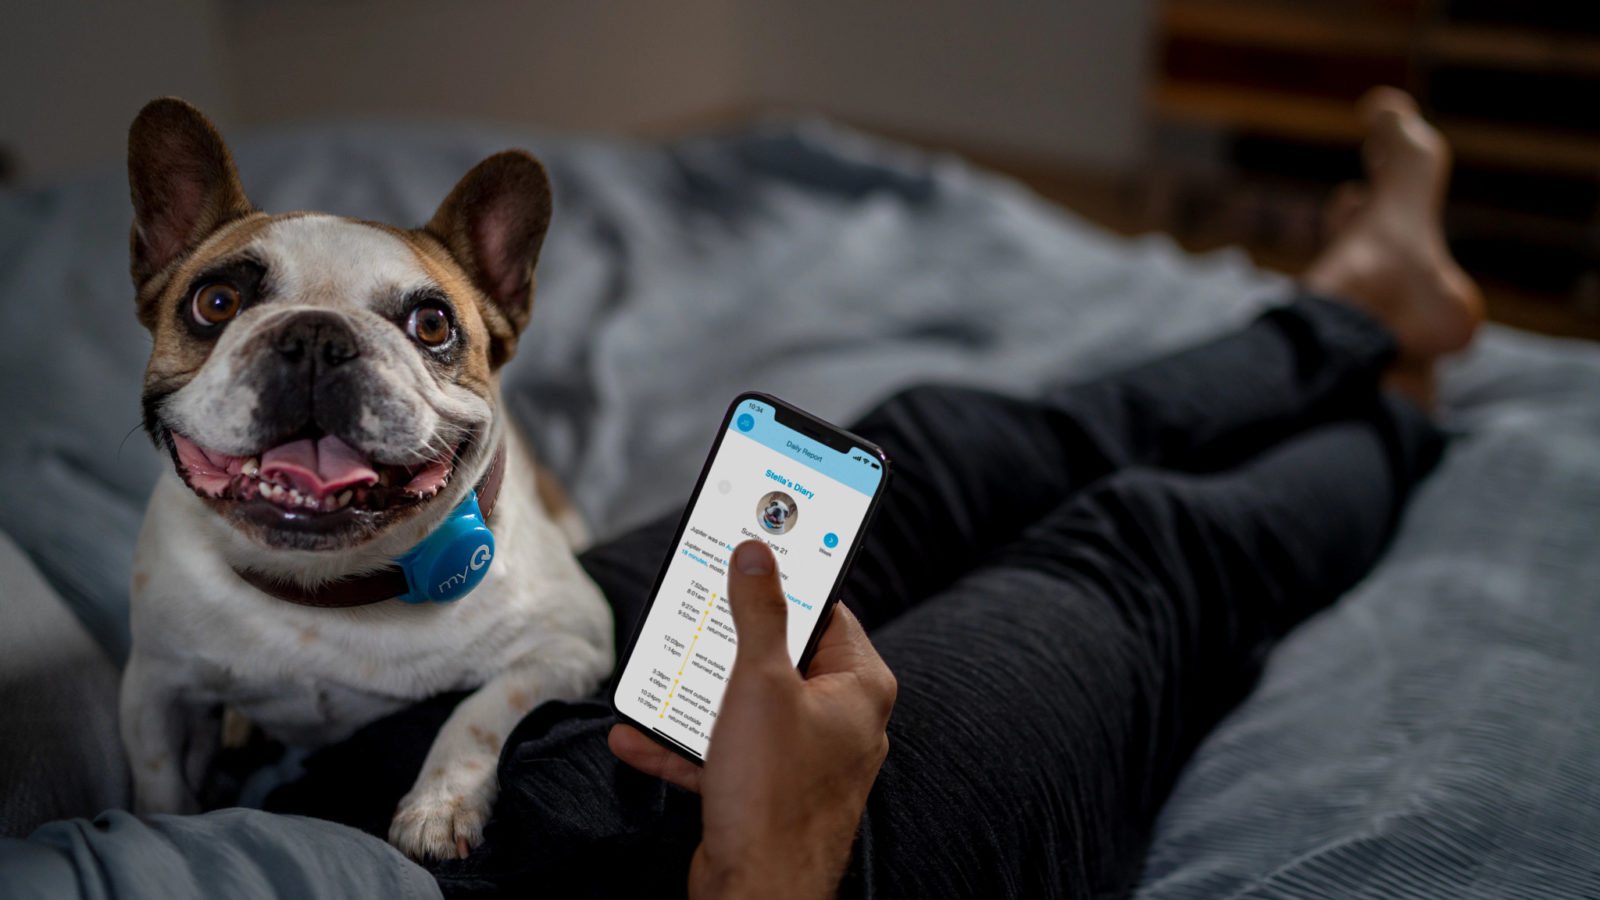 Dog on man's lap in bedroom with iPhone